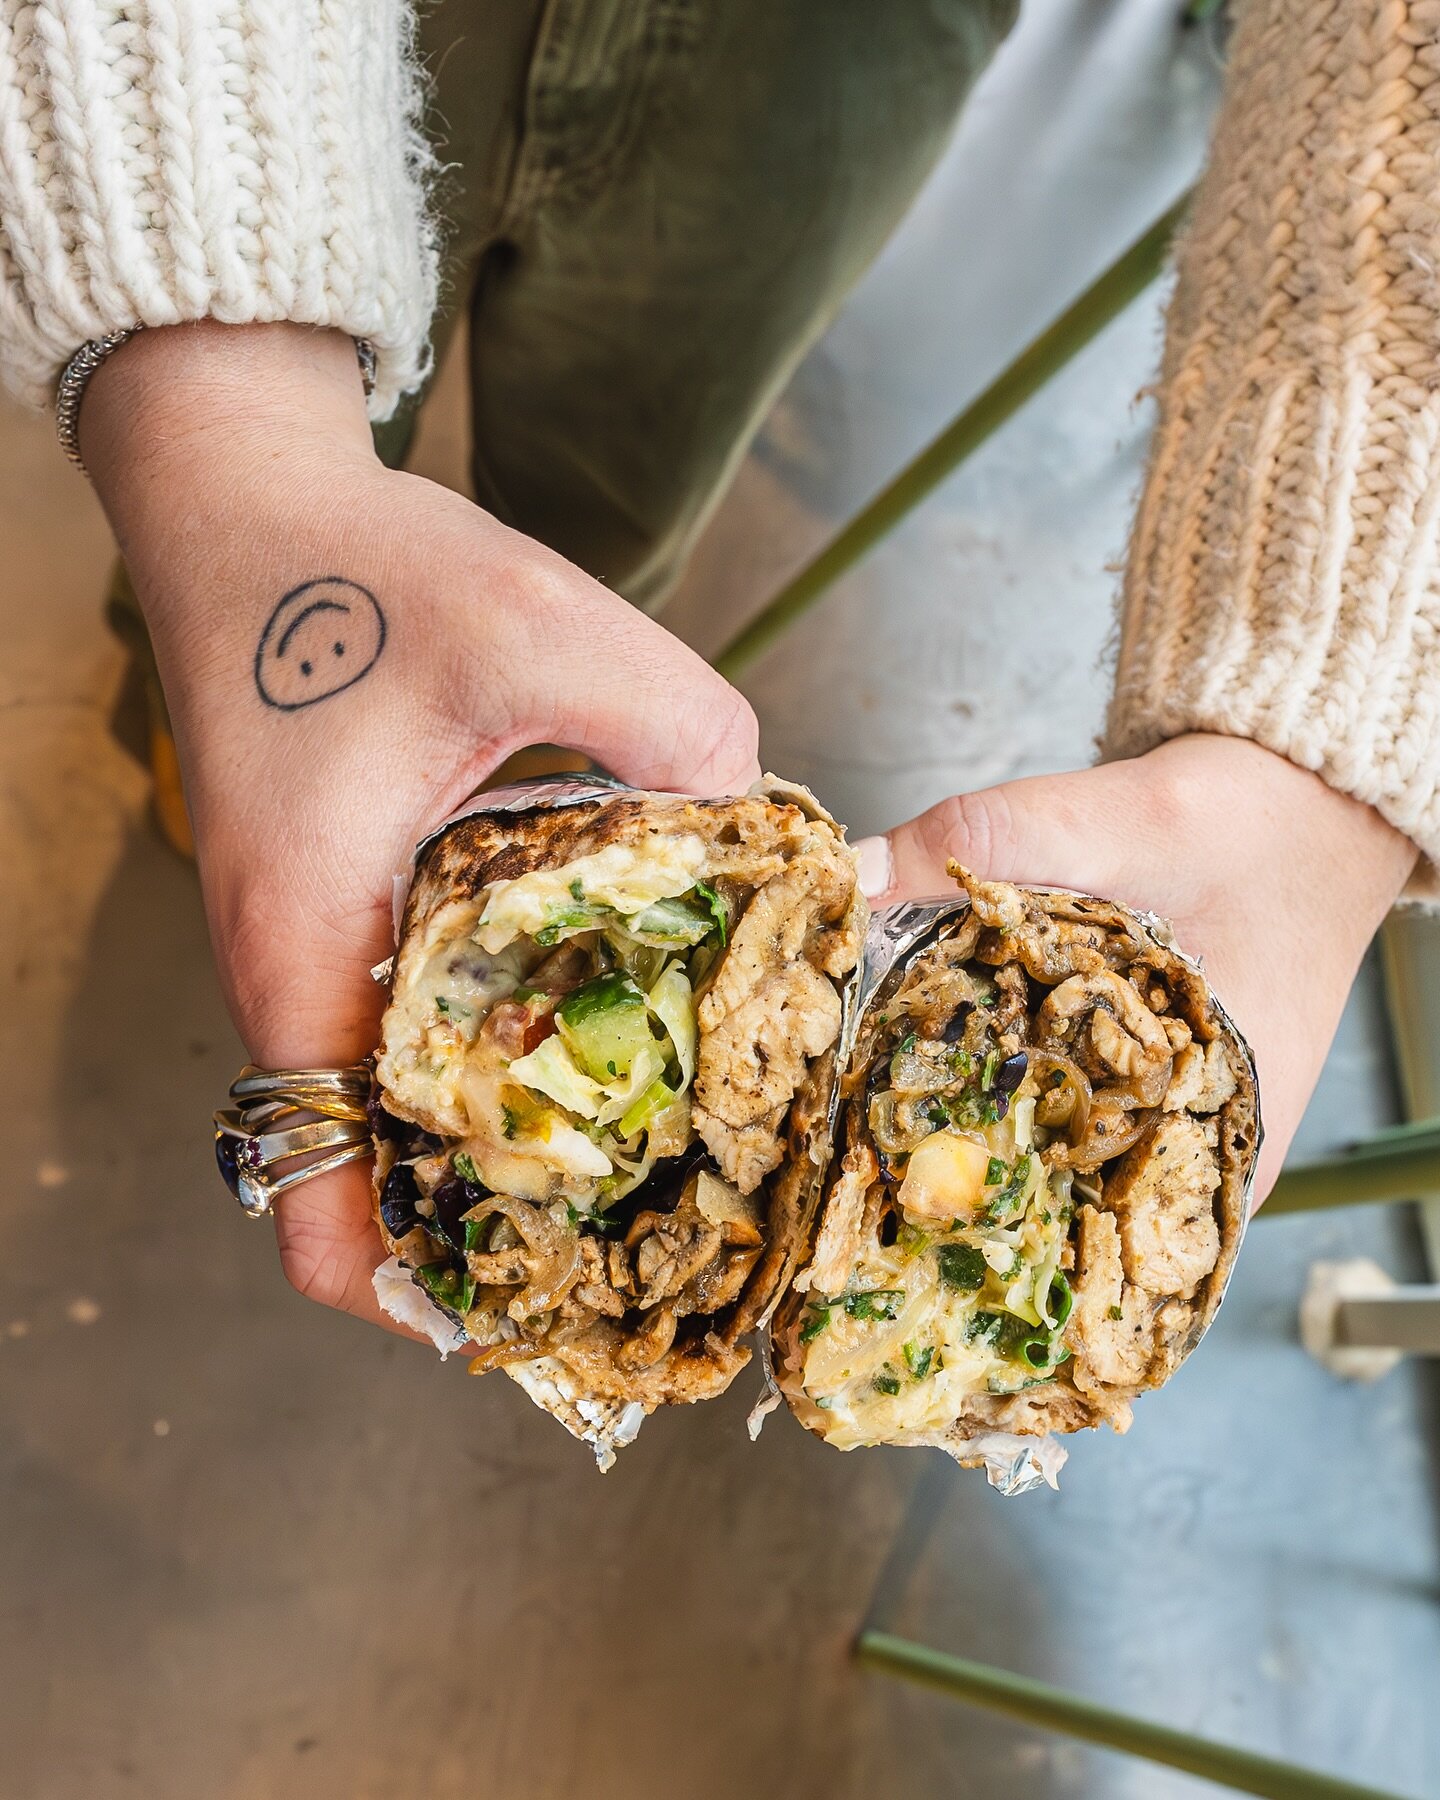 Chicken Shawarma, but make it a wrap! 🫣 Perfect to grab and go while running Saturday errands with the fam! &hearts;︎

#avivabykameel
#kameelcares
#halalcooking
#MediterraneanDiet